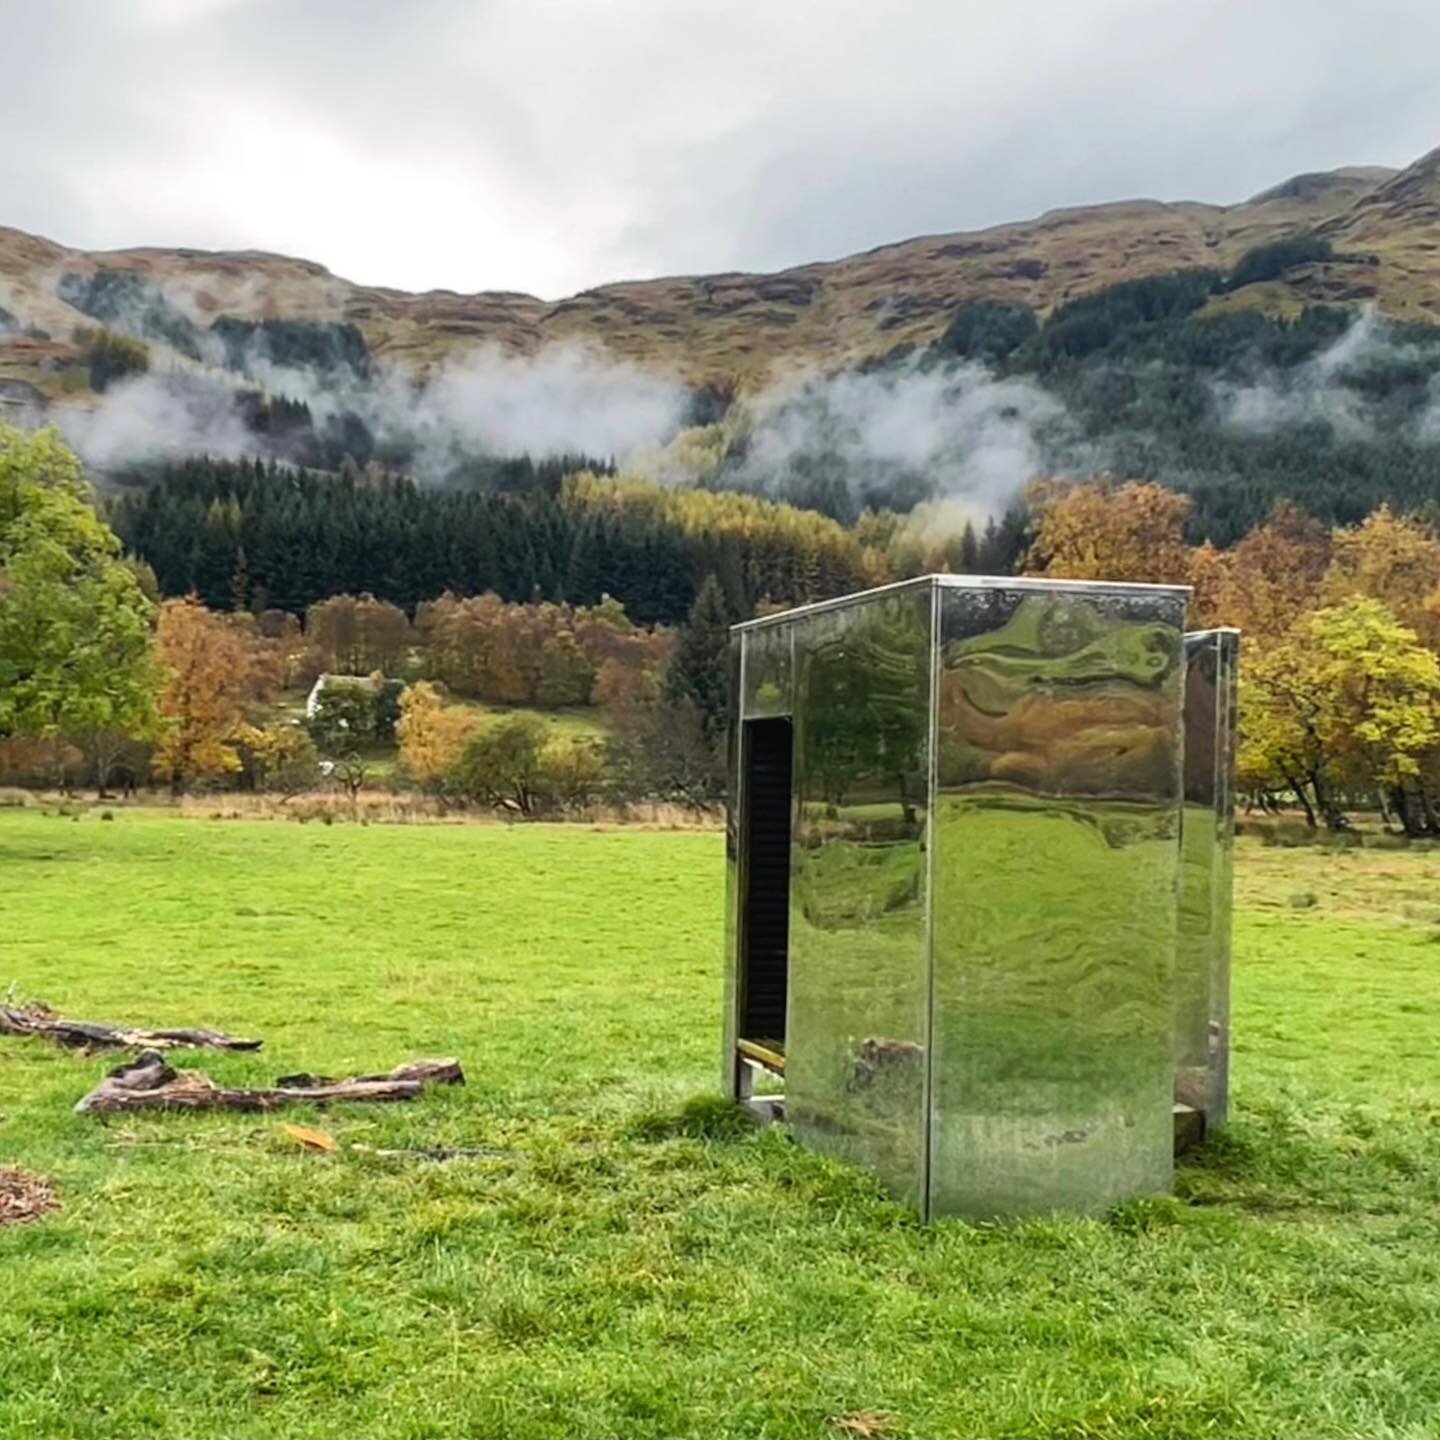 Slowly working my way through the photos from Monachyle Mhor. This mirror box is in the field right in front of the hotel, between the two lochs. I always assumed it was super famous, but it's just cos it was in a little 5 minute thing on CBeebies!